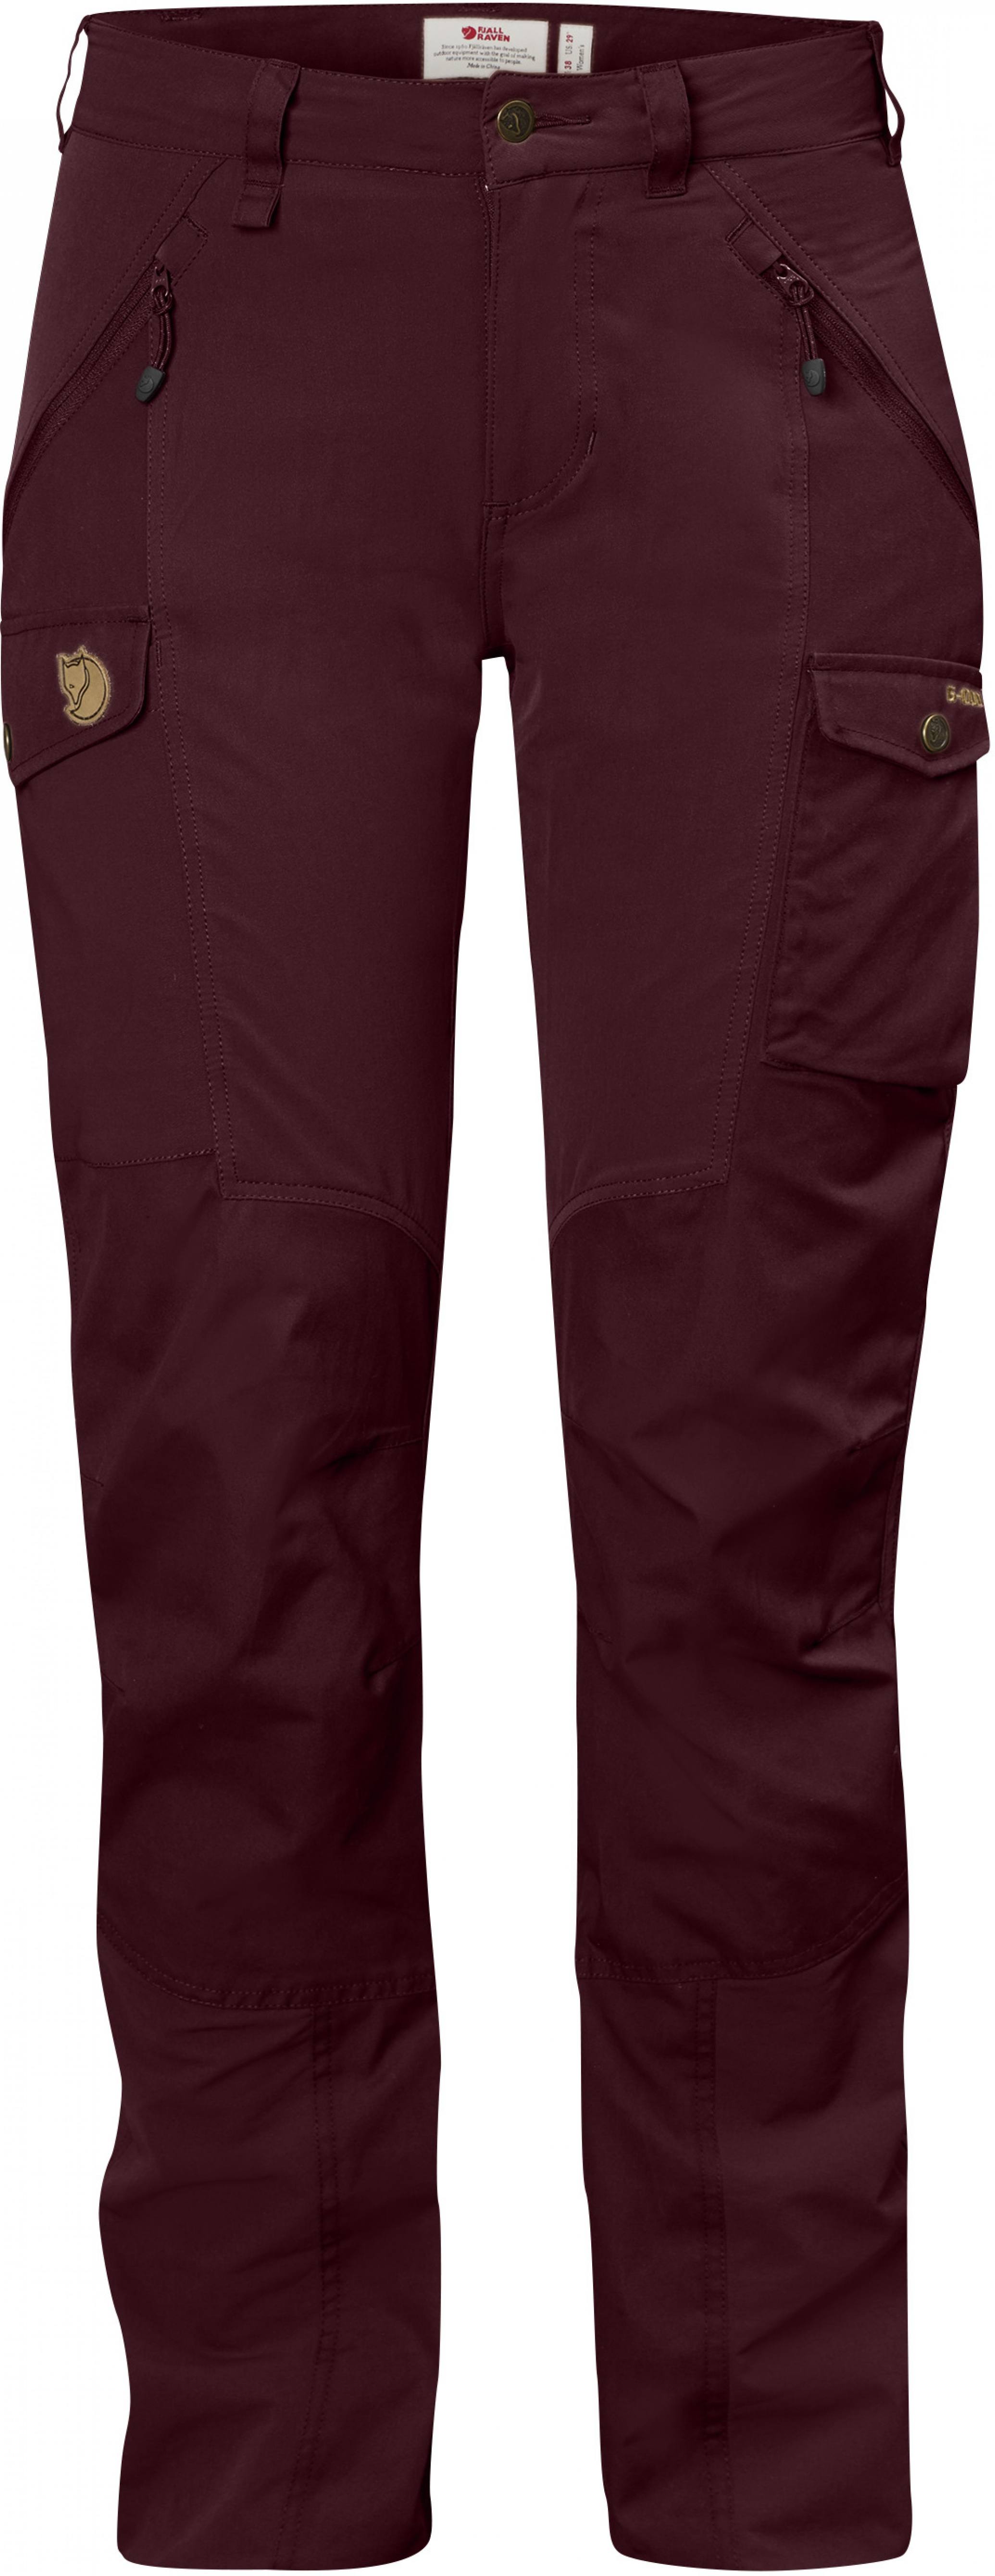 Nikka Trousers Curved Dark red 46